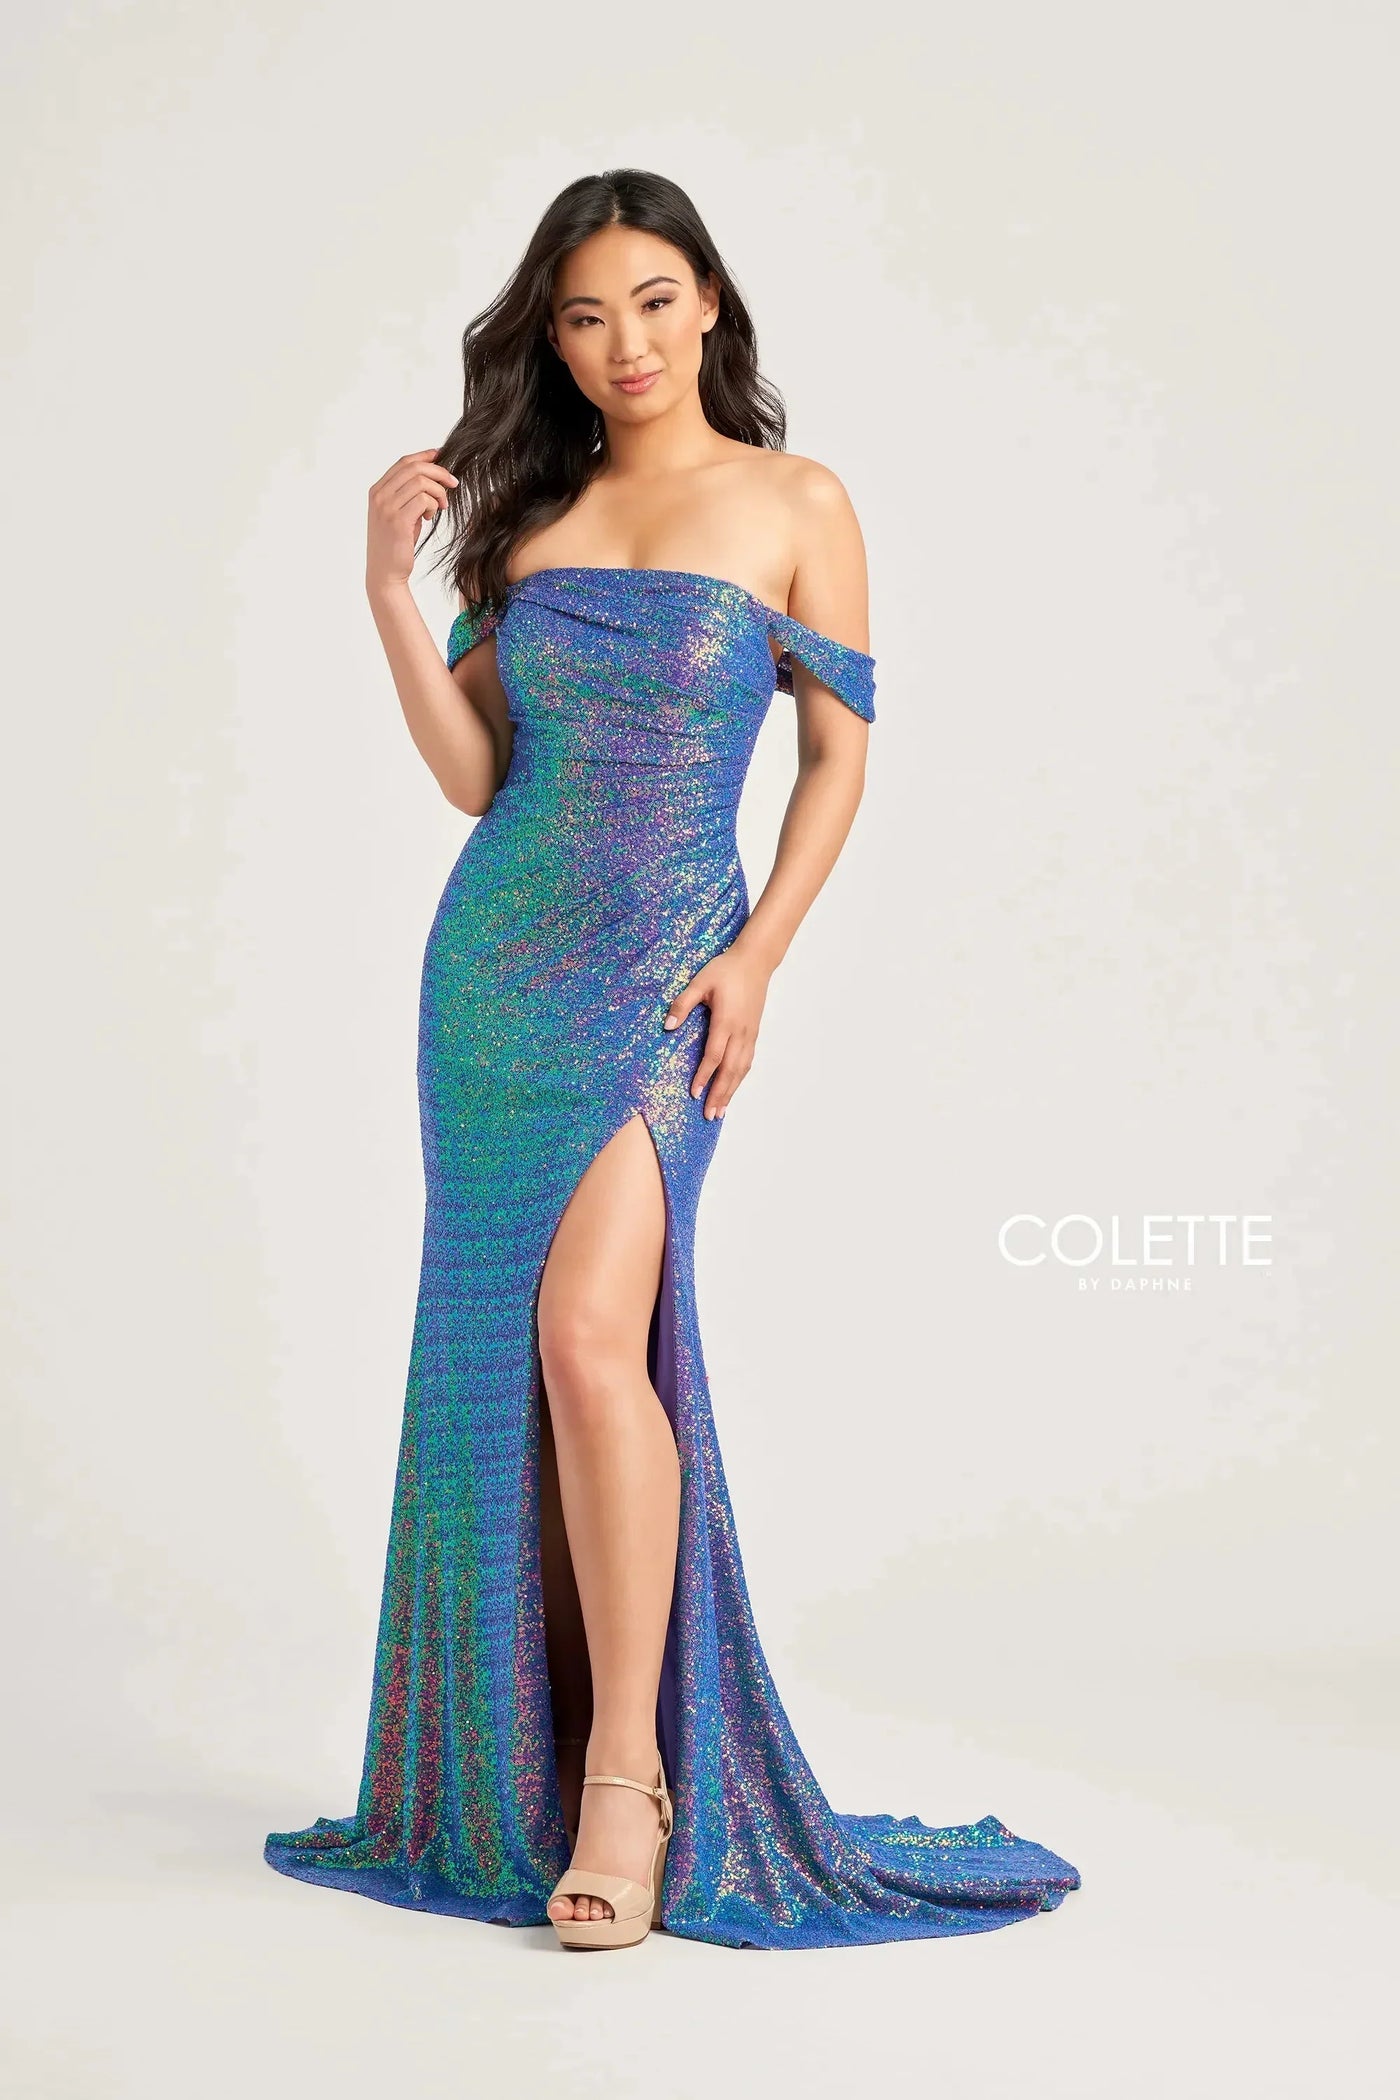 Colette By Daphne CL5129 - Ruched Sequin Prom Dress